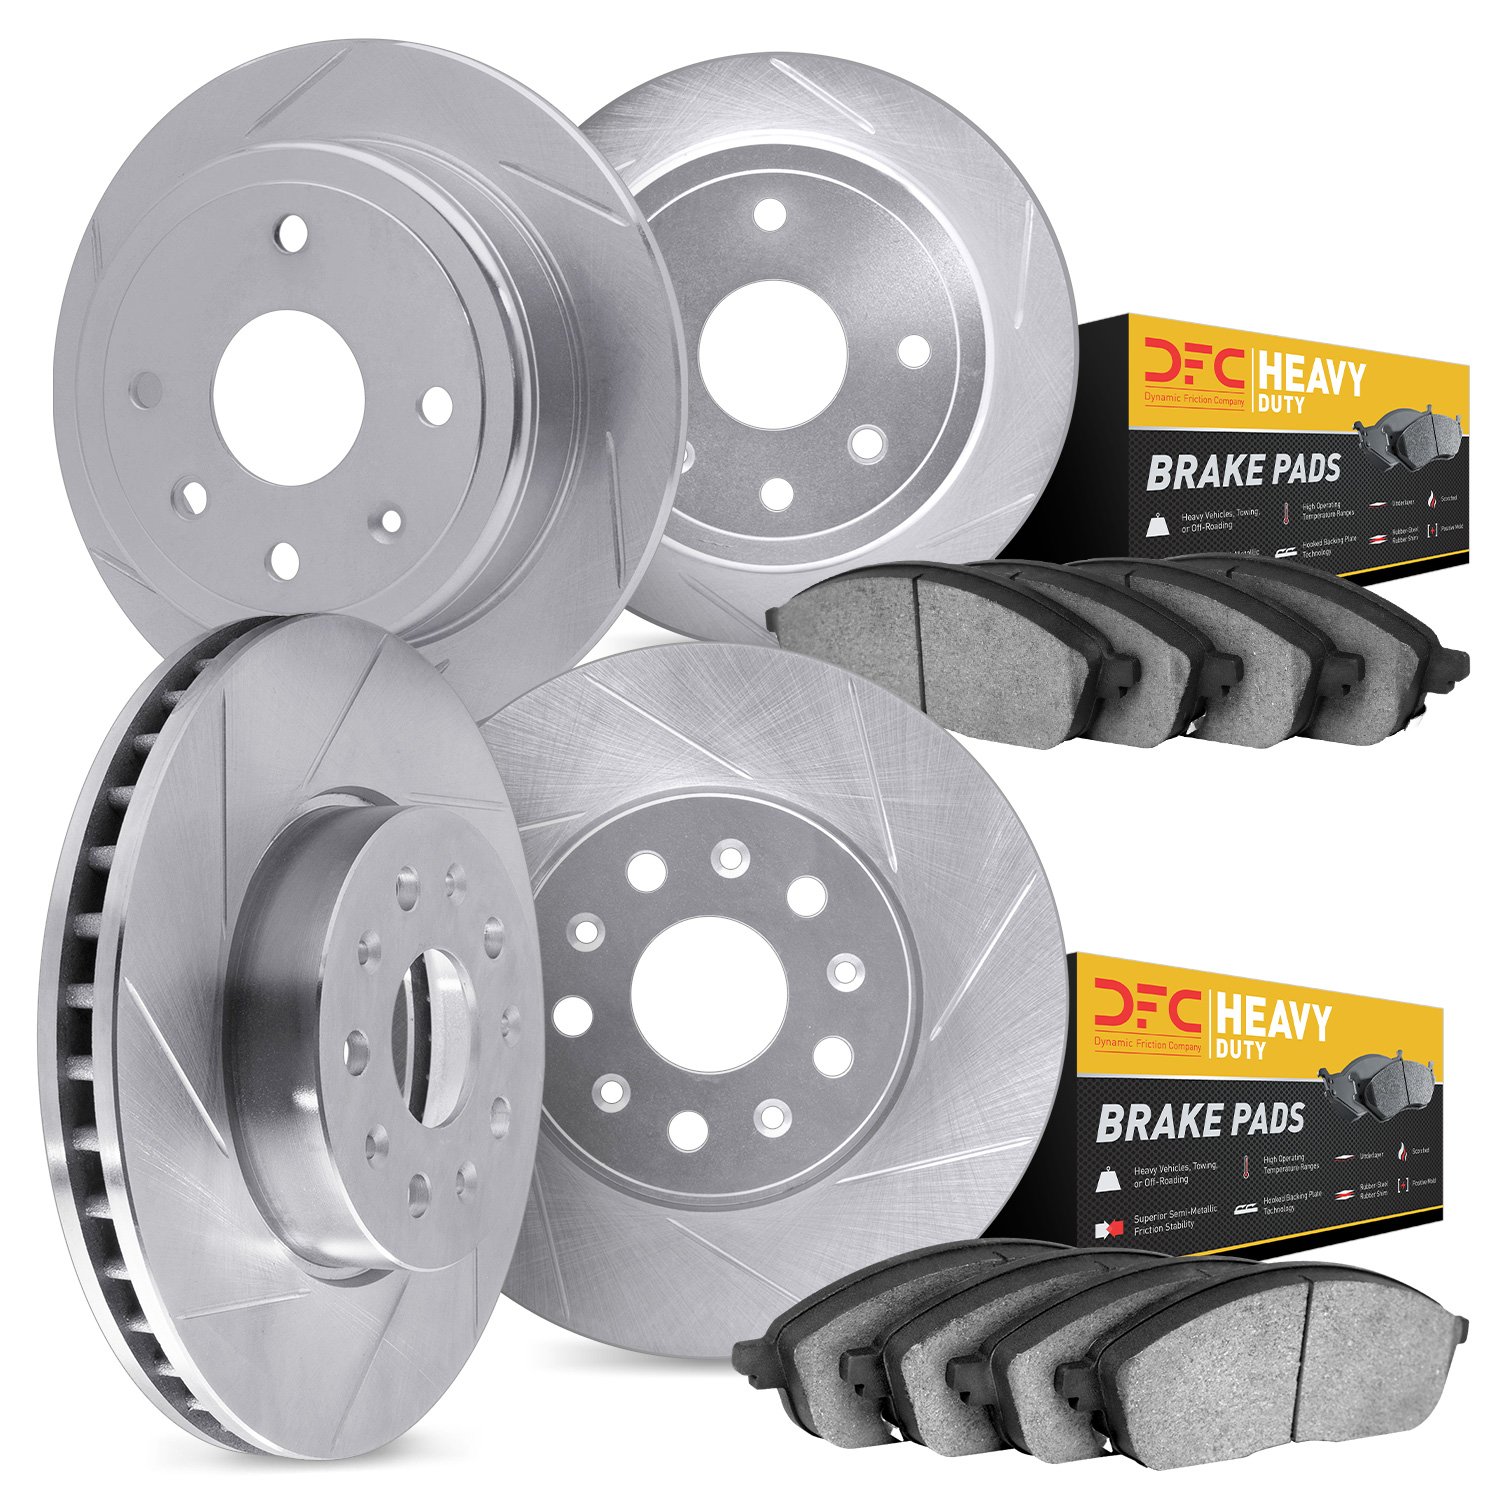 5204-99070 Slotted Brake Rotors w/Heavy-Duty Brake Pads Kits [Silver], 2003-2005 Ford/Lincoln/Mercury/Mazda, Position: Front and